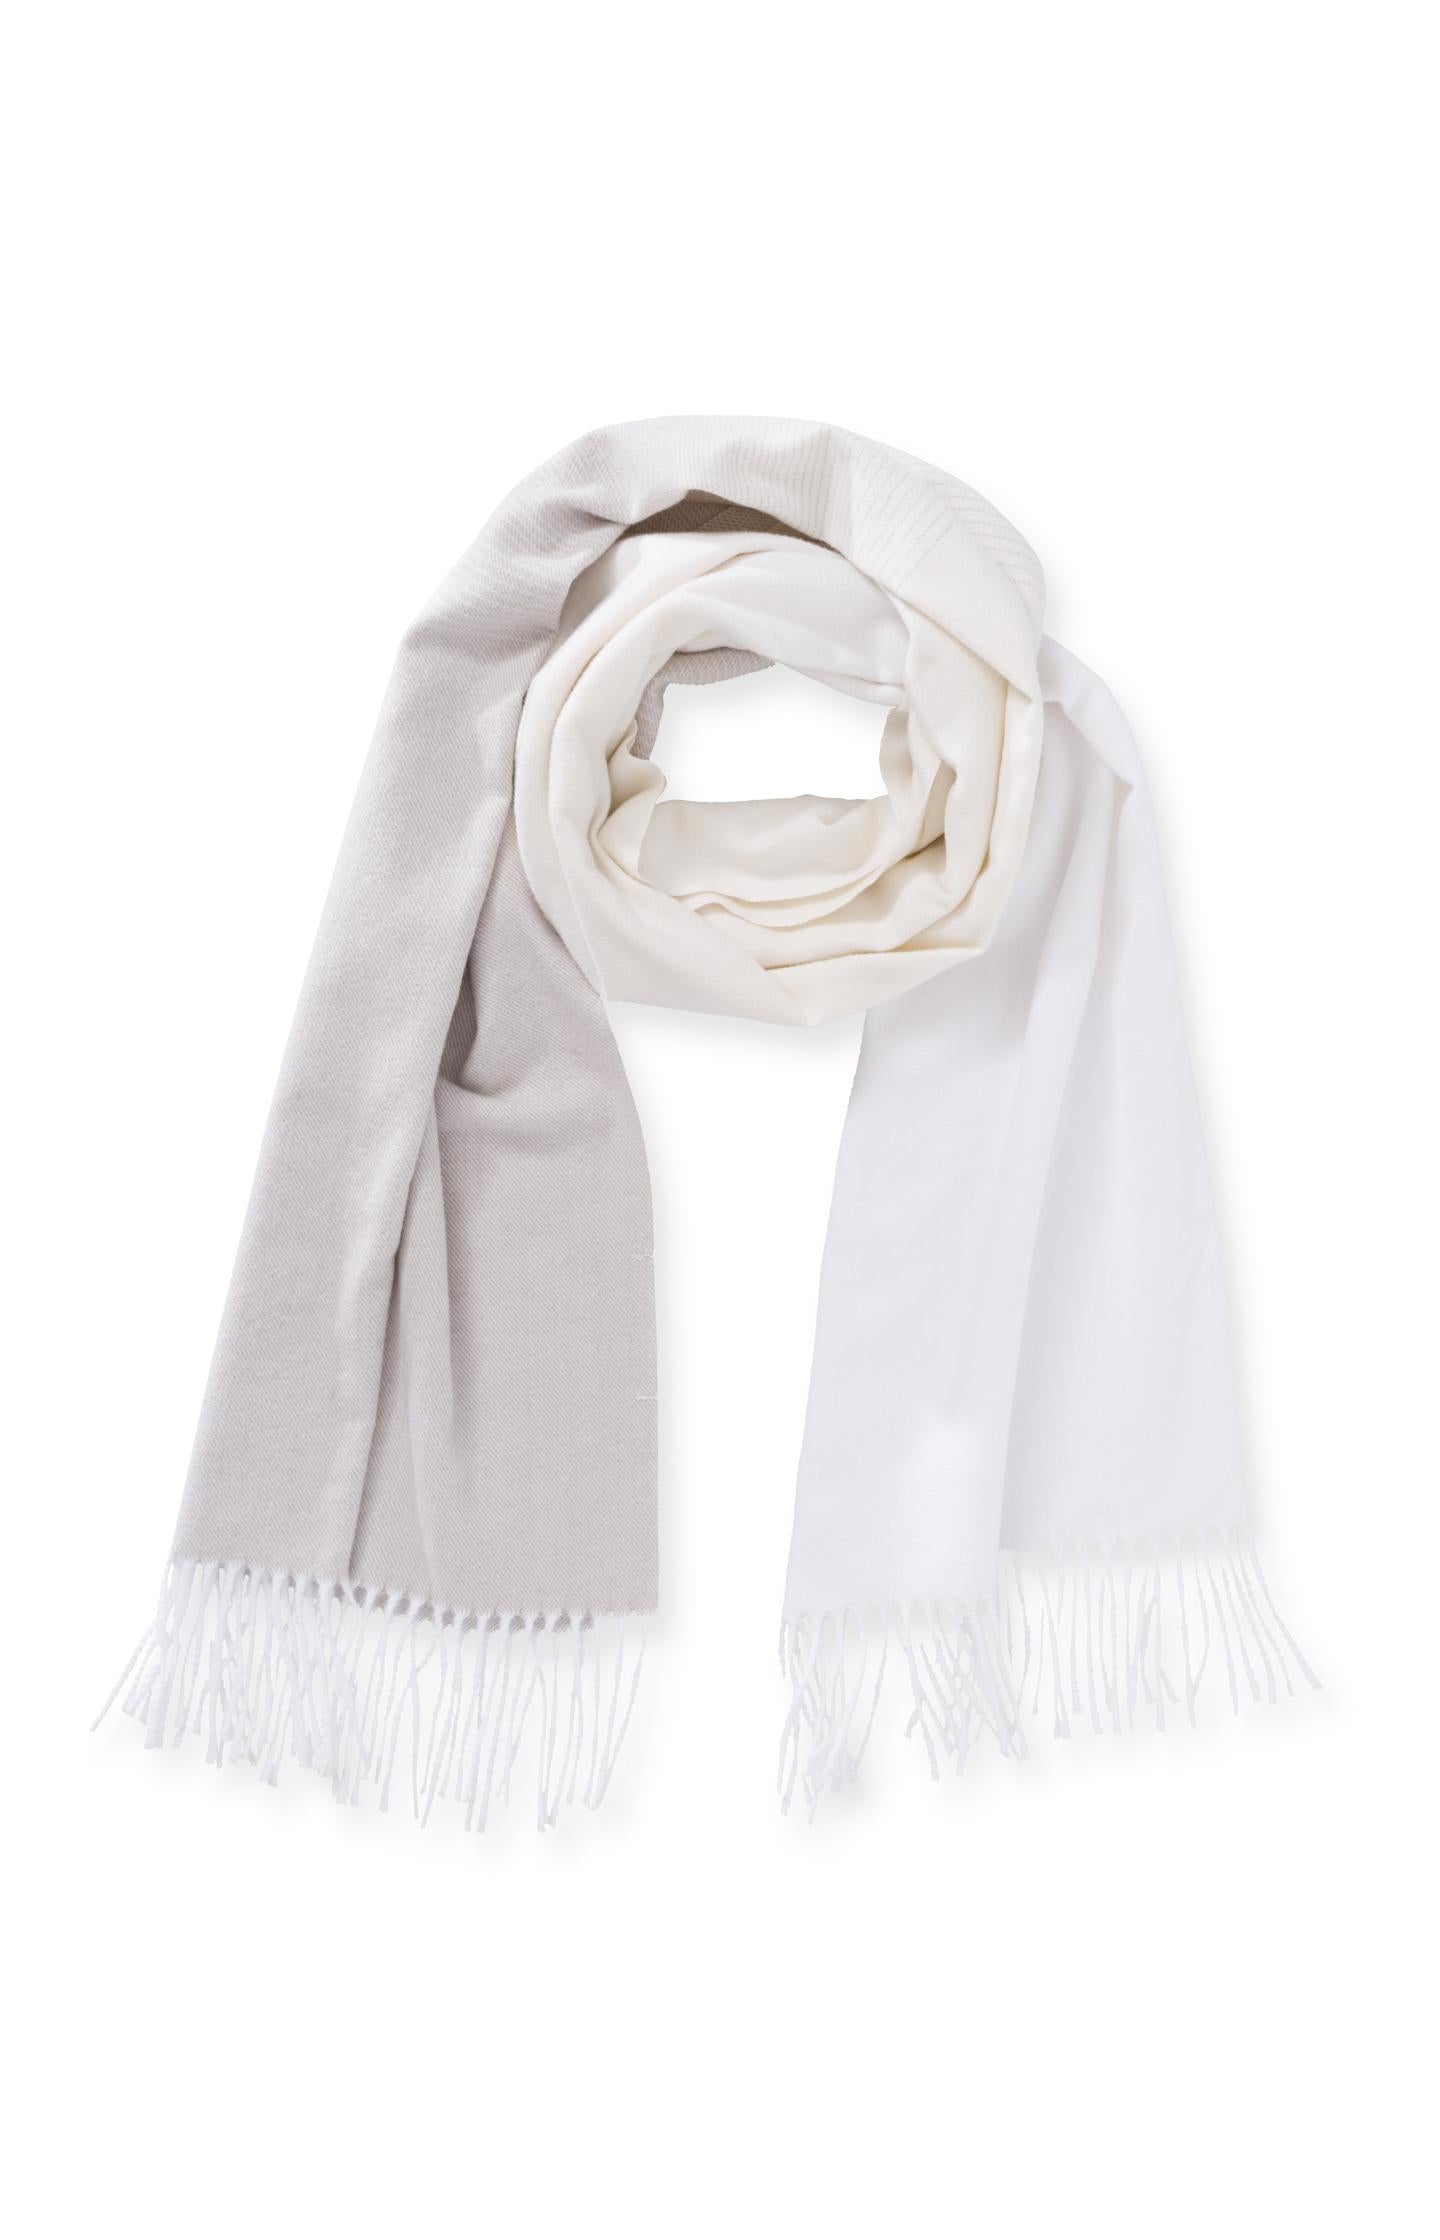 Soft knitted scarf with gradient effect and fringes - Bright White Dessin - Type: product